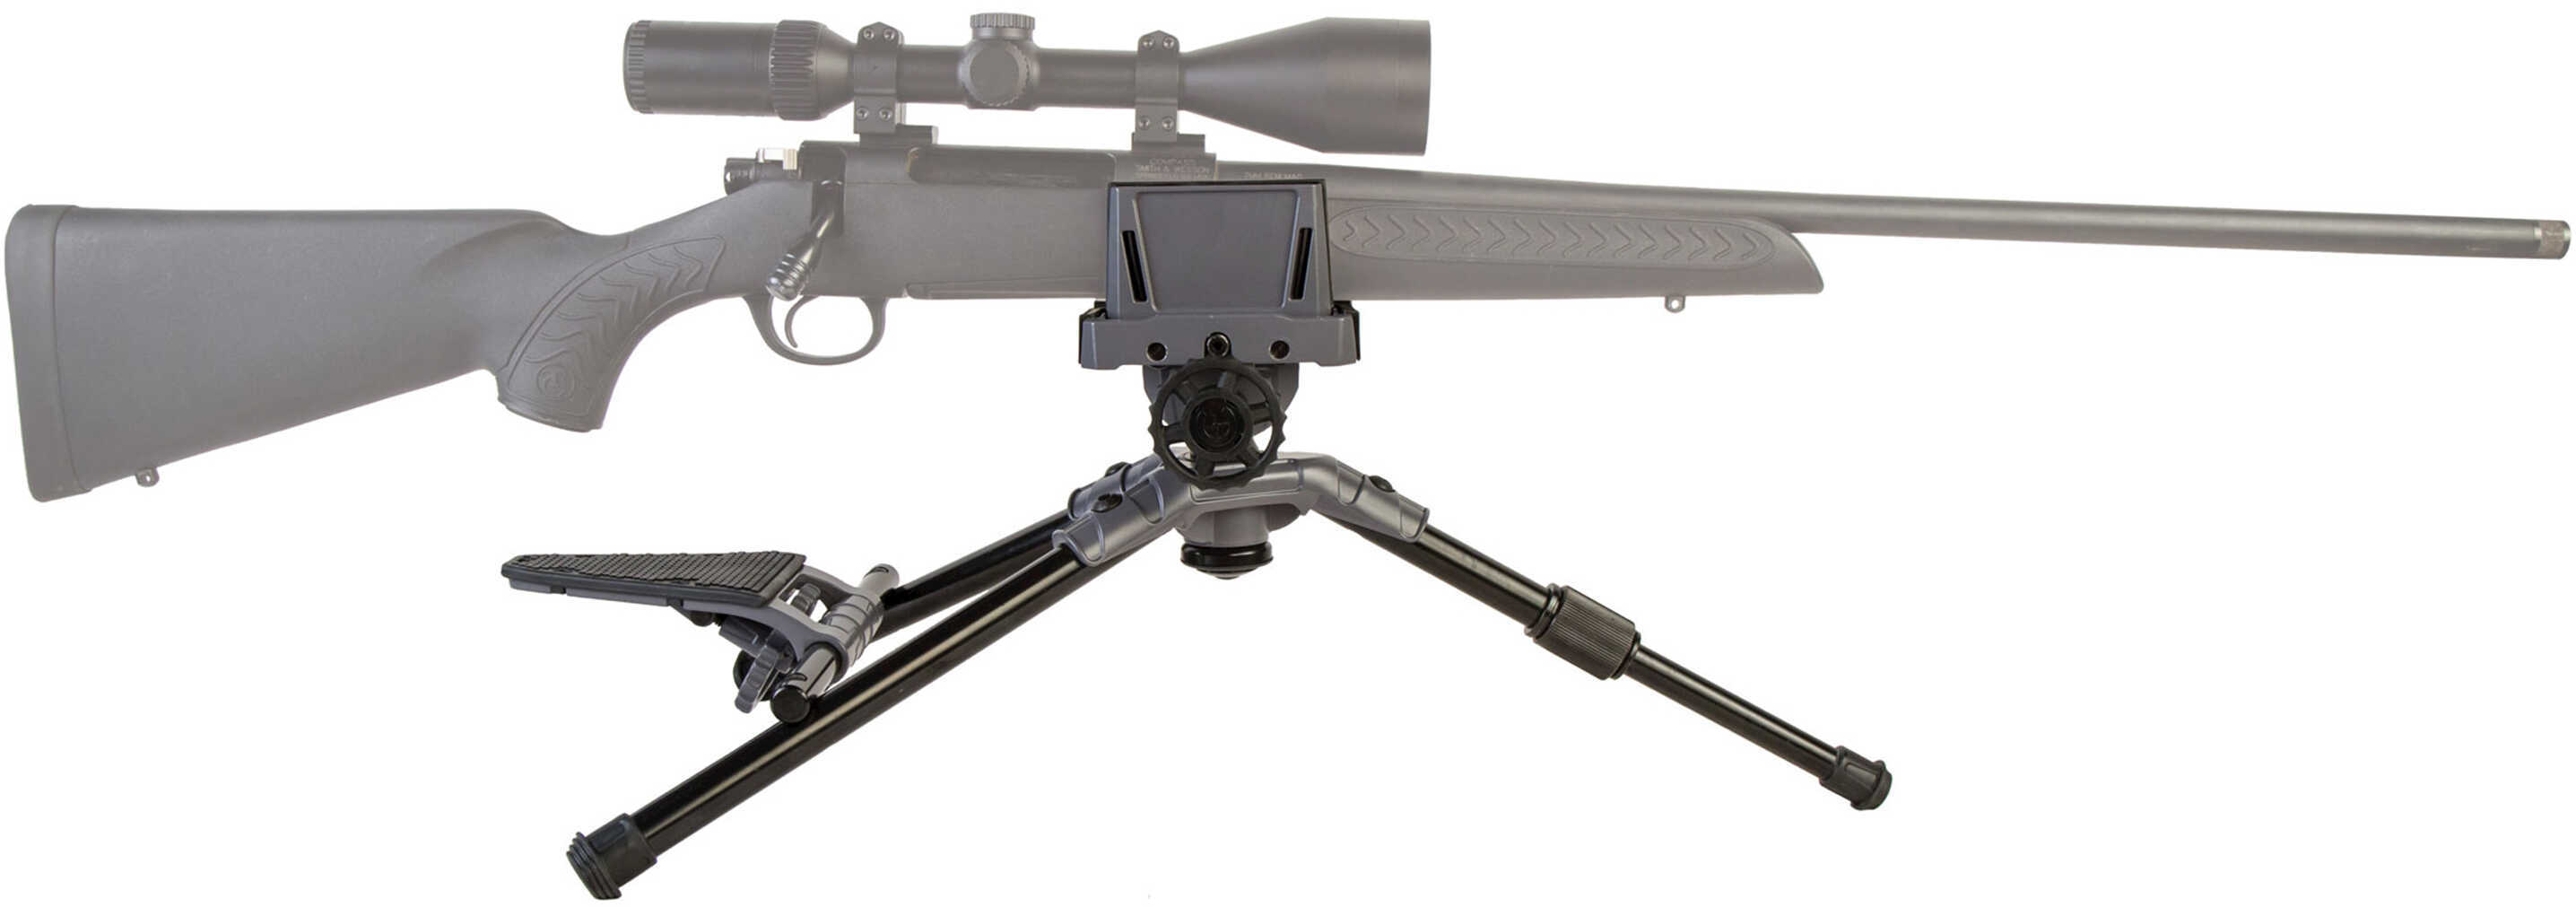 Cw Precision Turret Shooting Rest